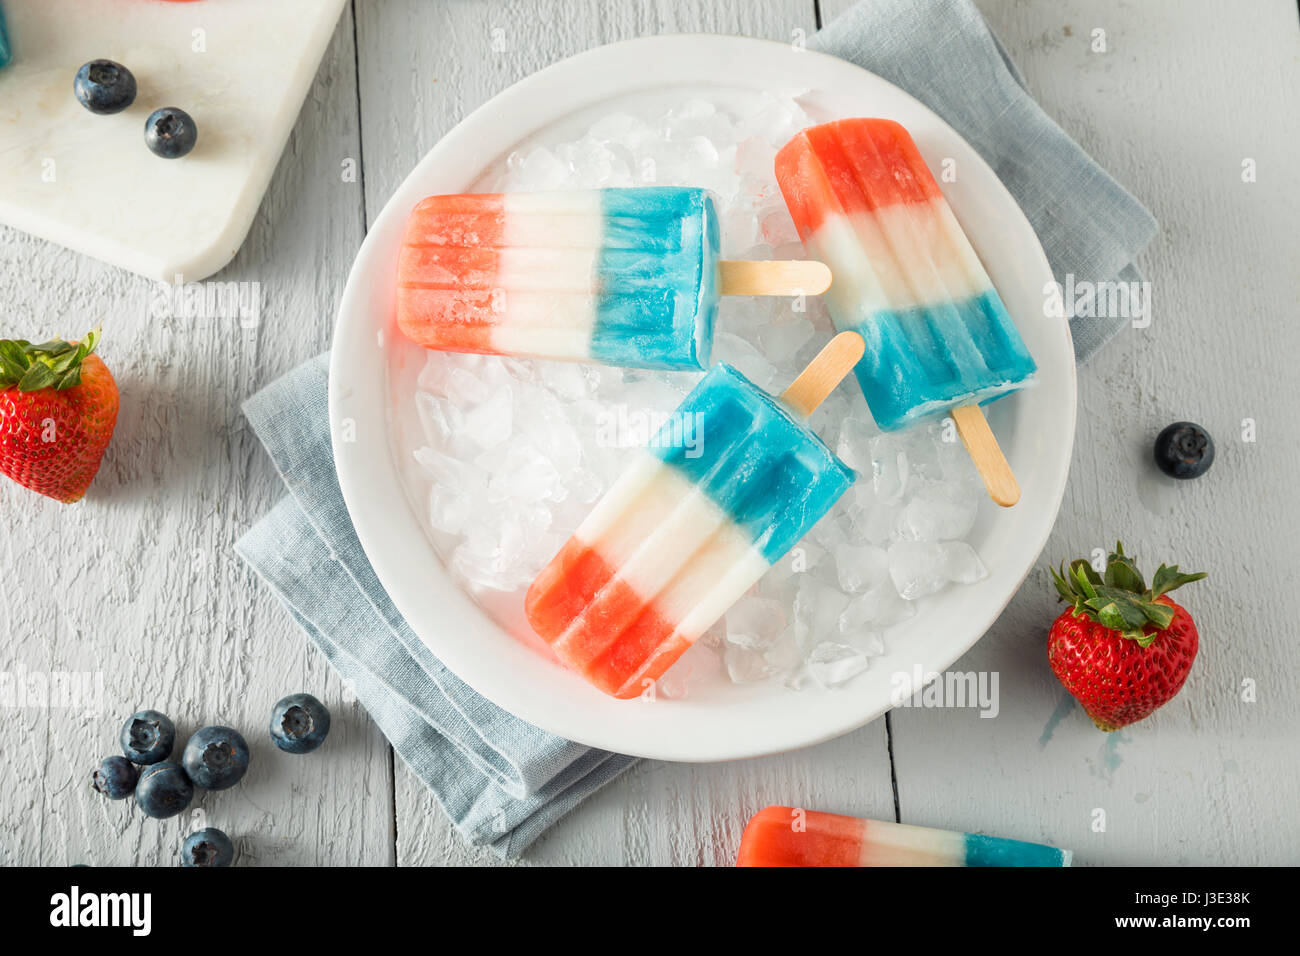 Patriotic Red White Blue Popsicles for the 4th of July Stock Photo